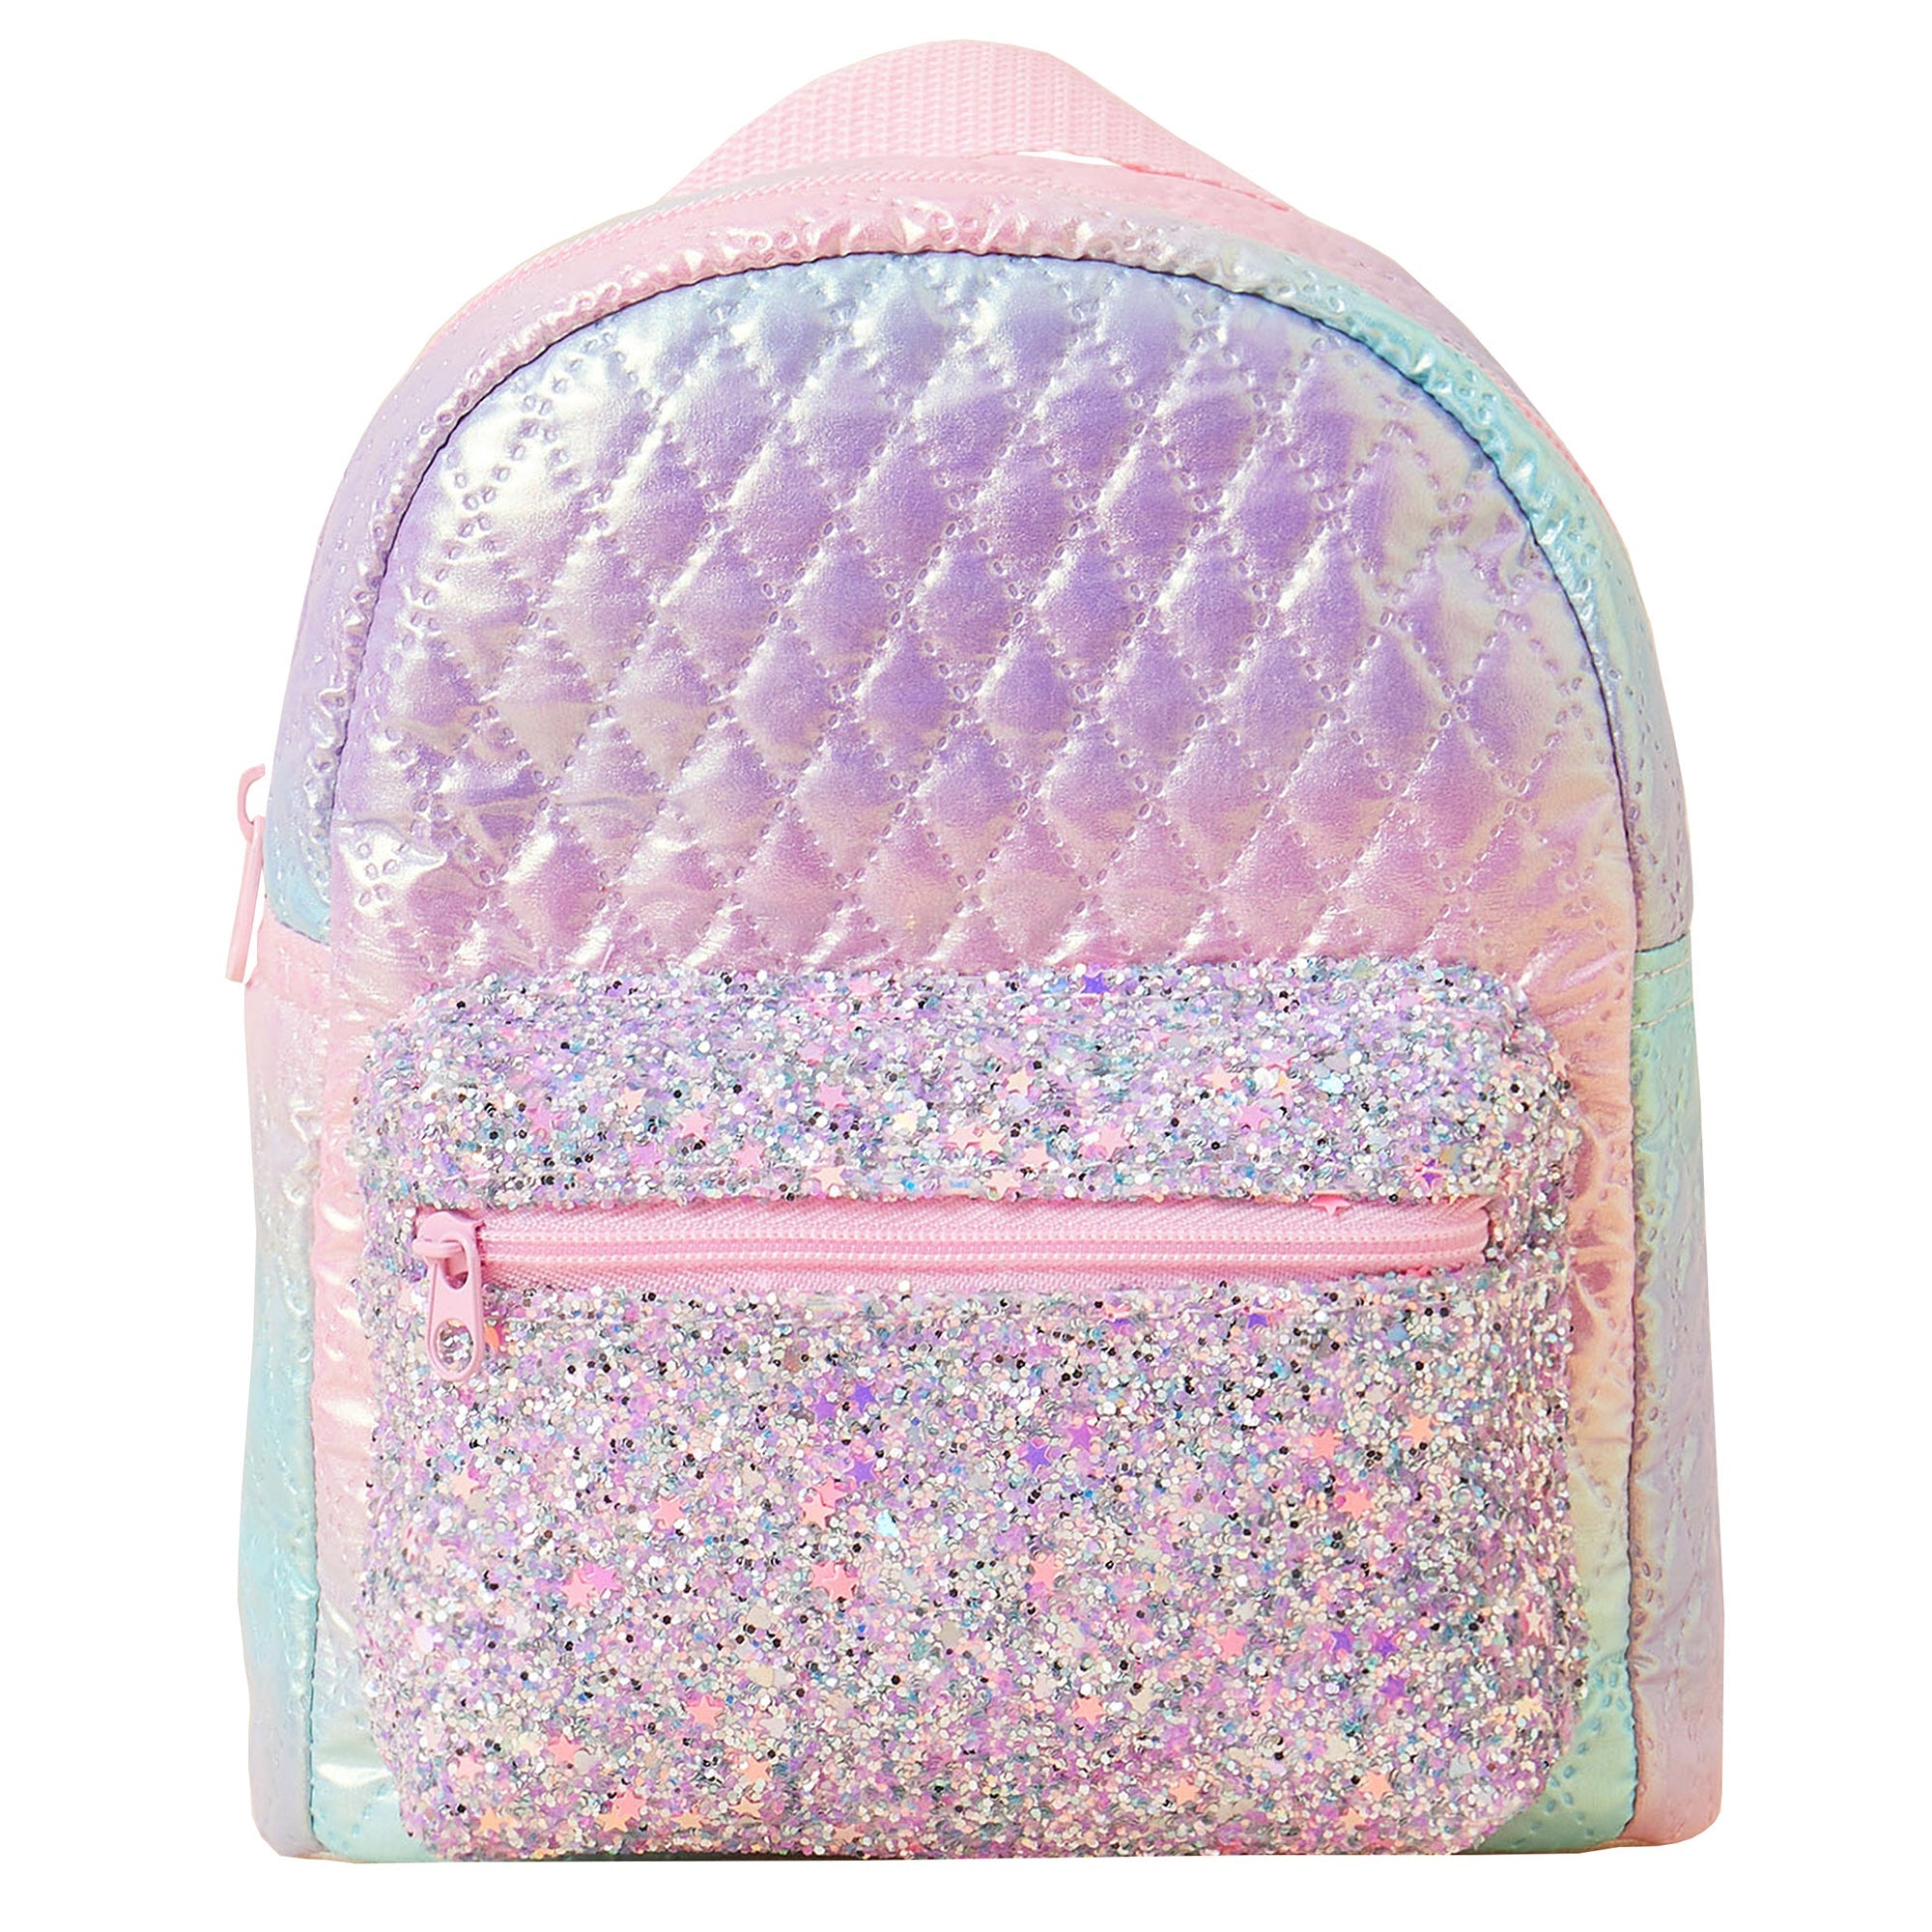 Accessorize London Girl's Mini Quilted Backpack